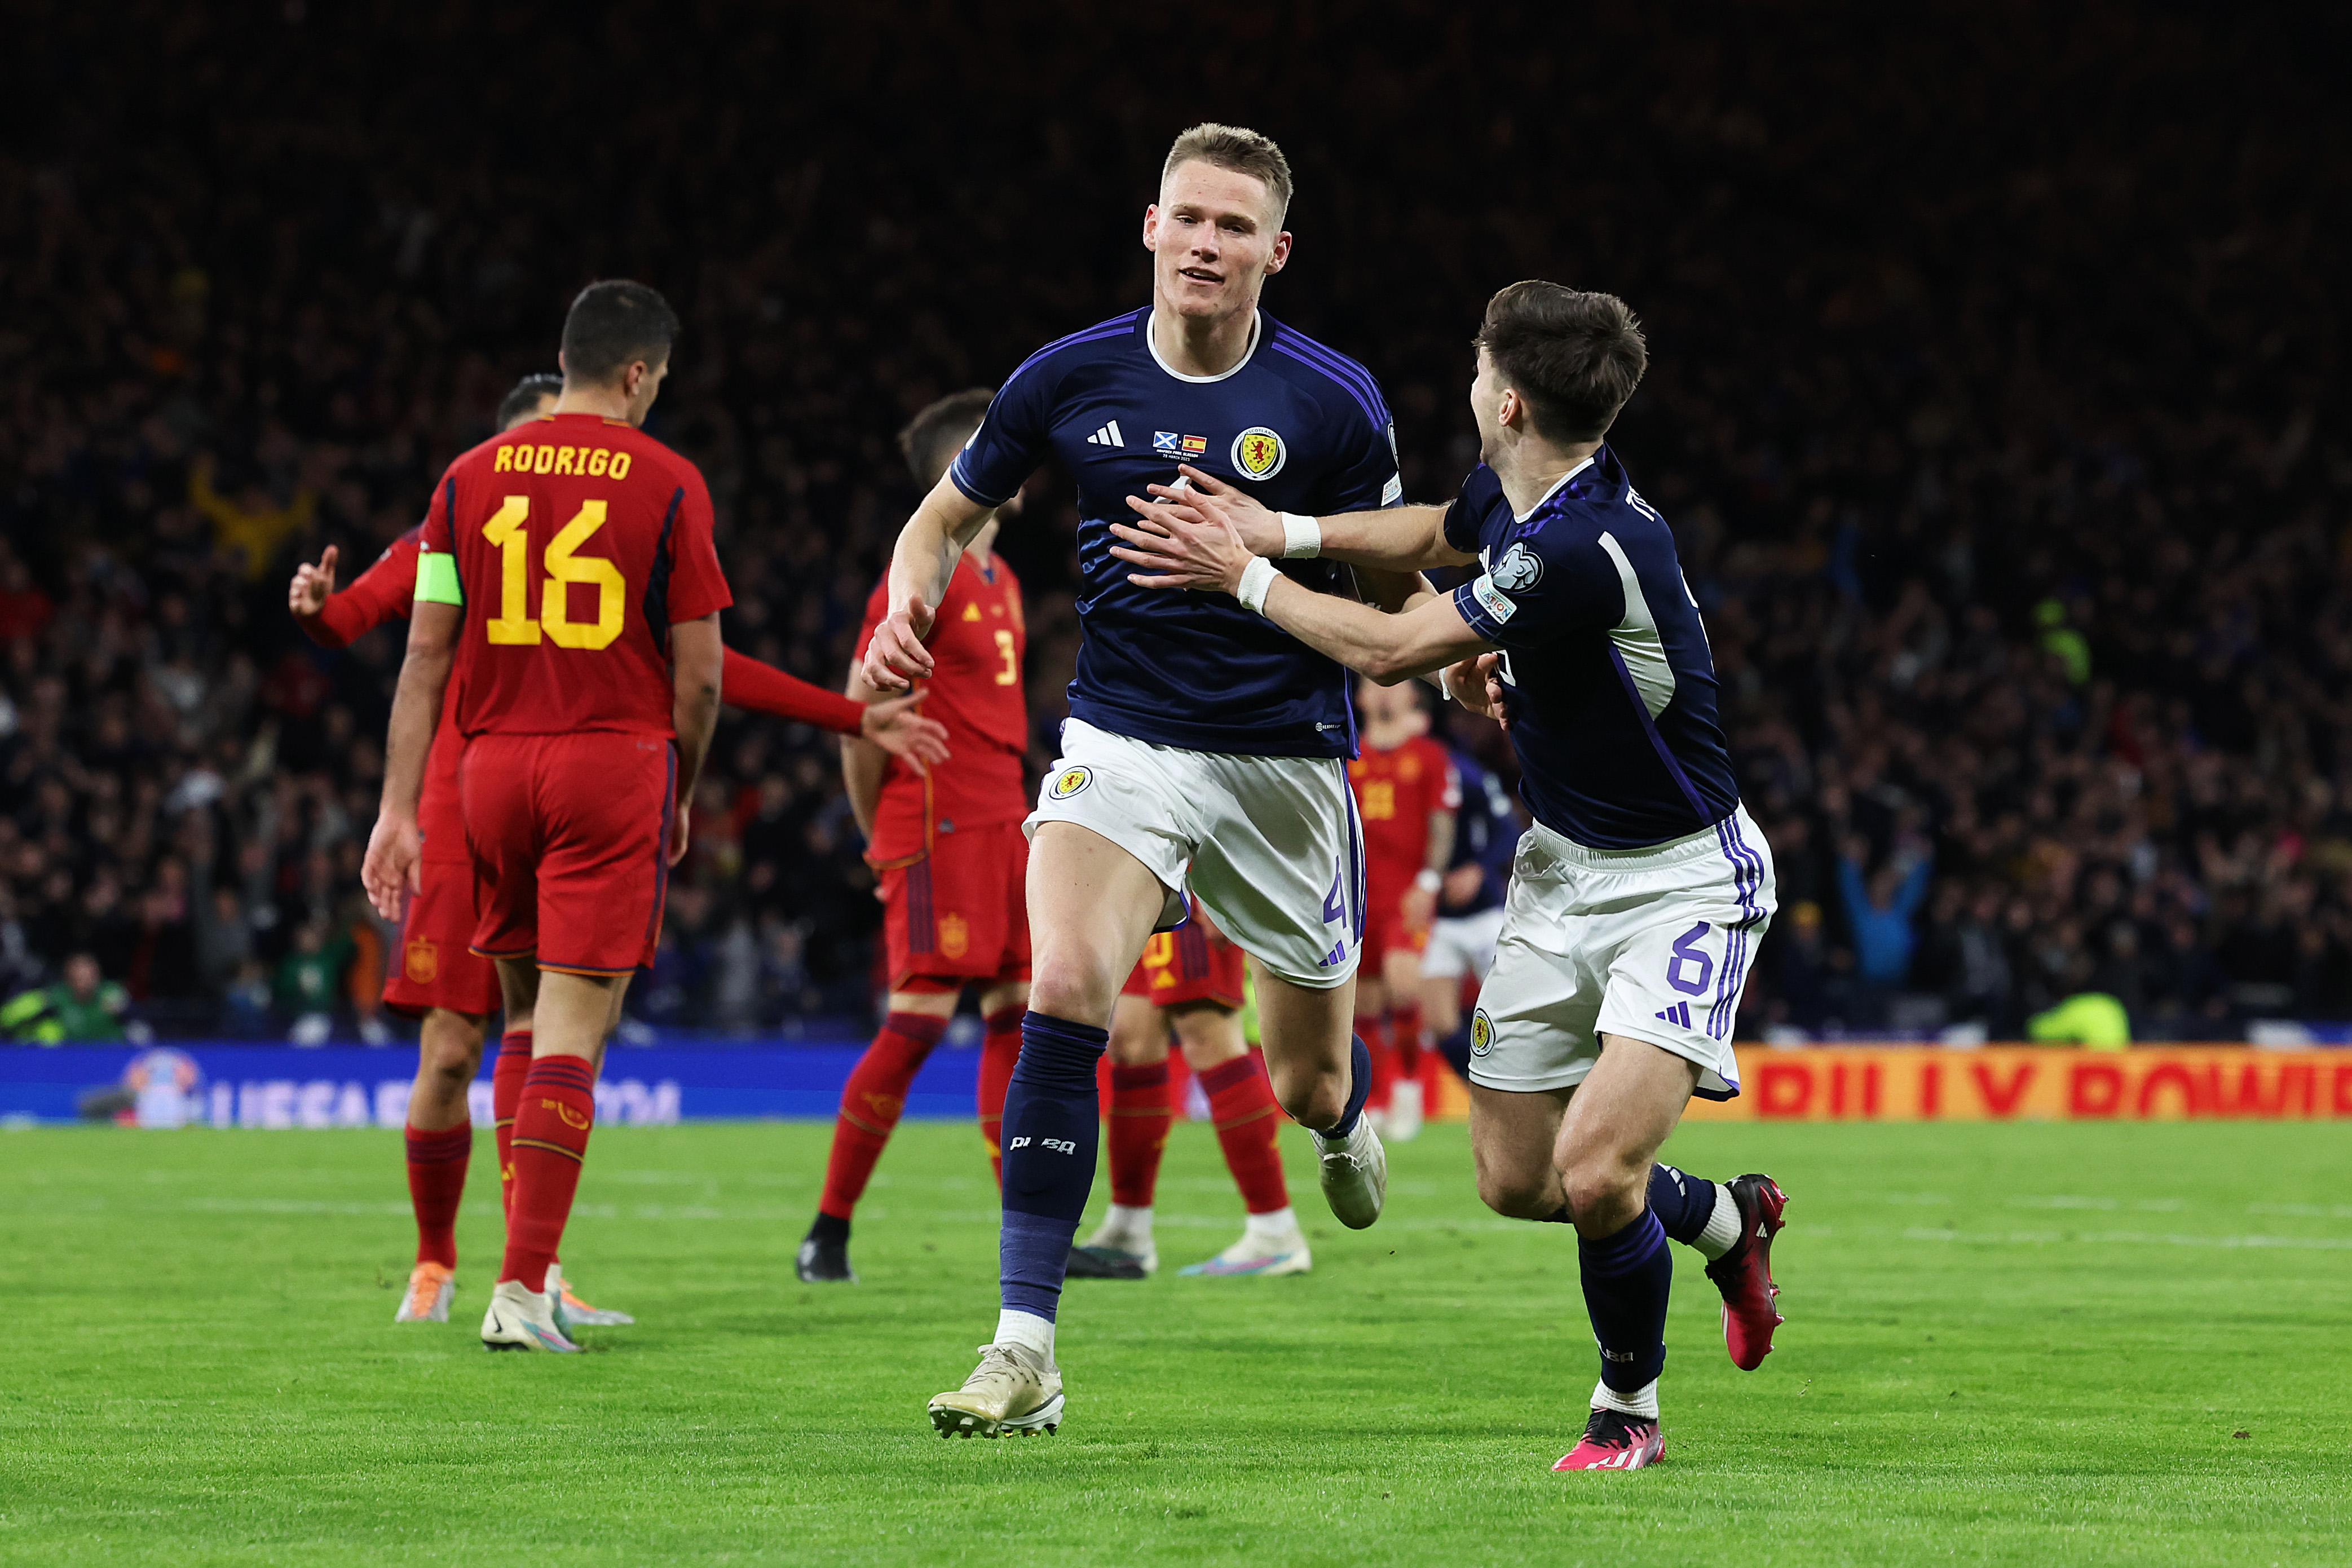 Scotland's win over Spain will give them confidence over facing anyone from Pot 1